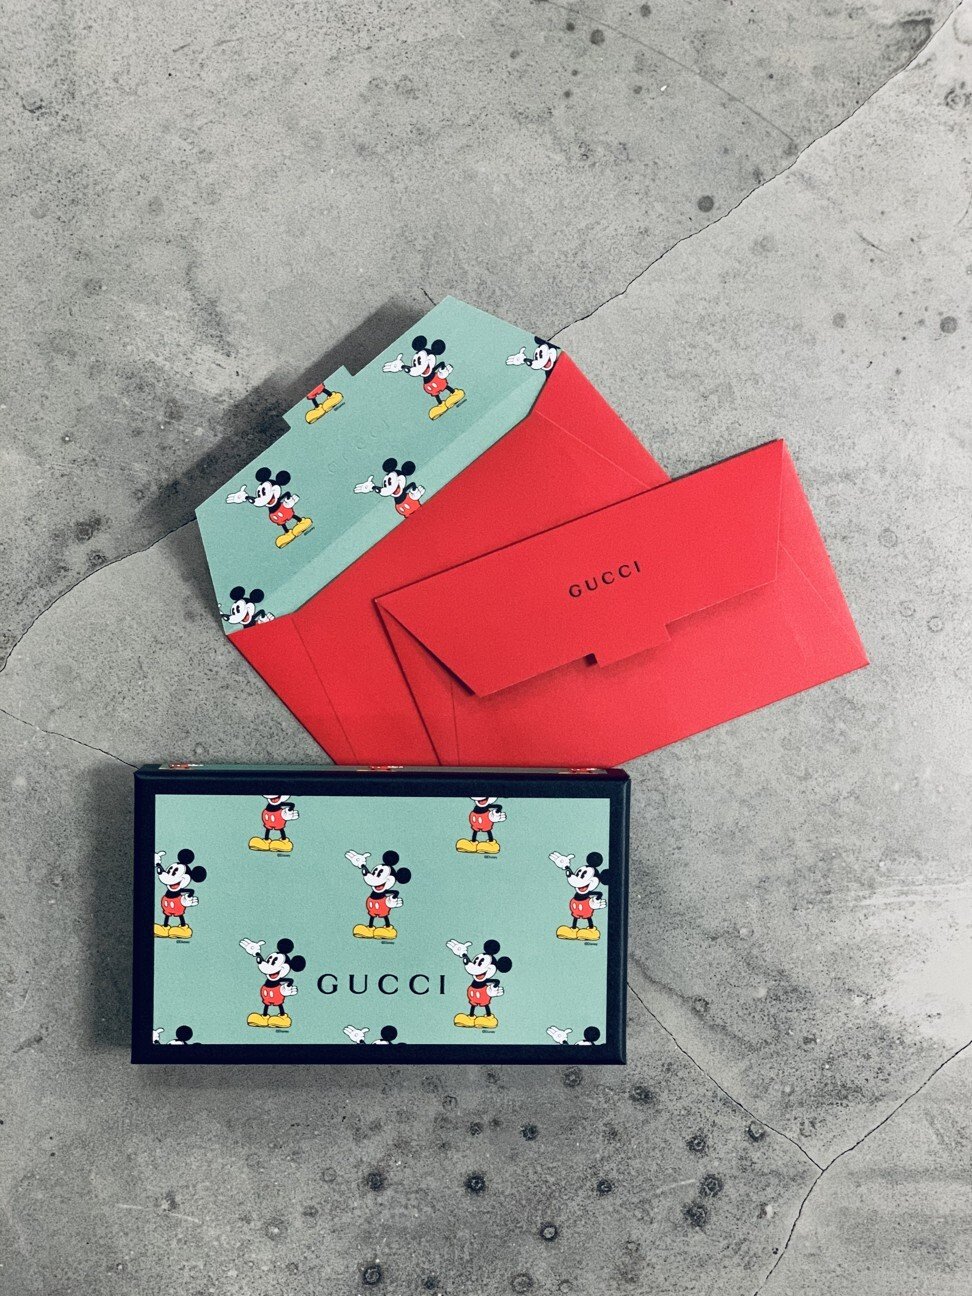 Gucci Lunar New Year Red Envelope 2021